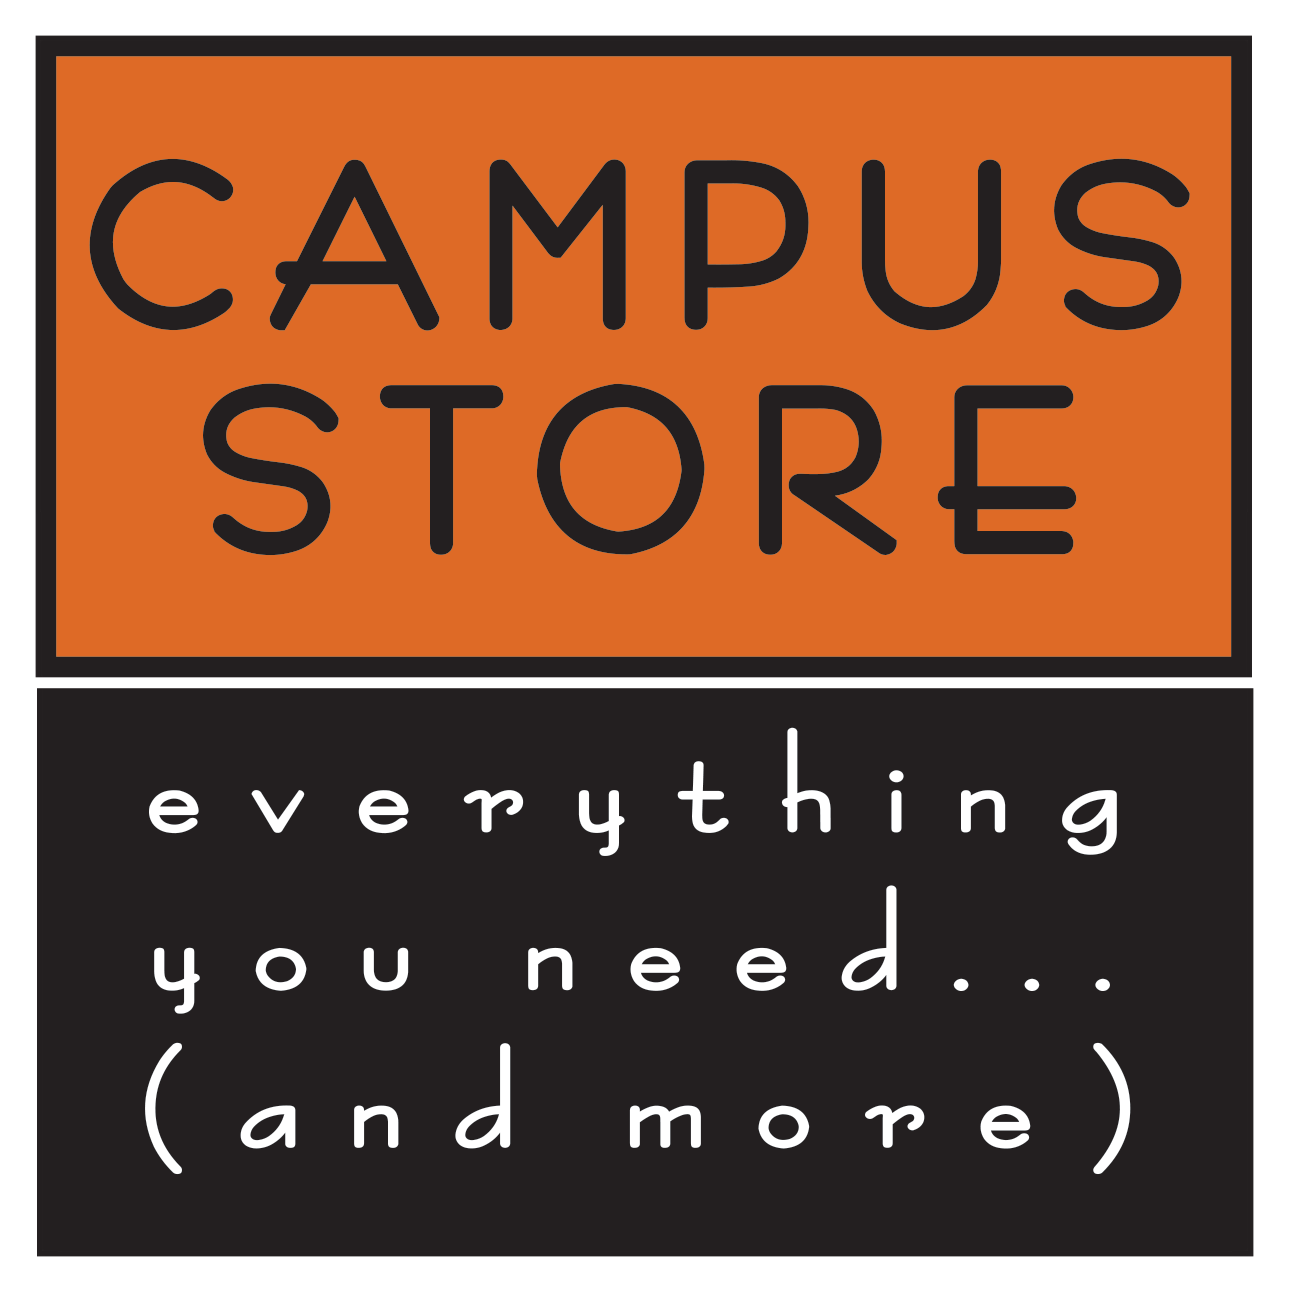 Alfred State Campus Store logo